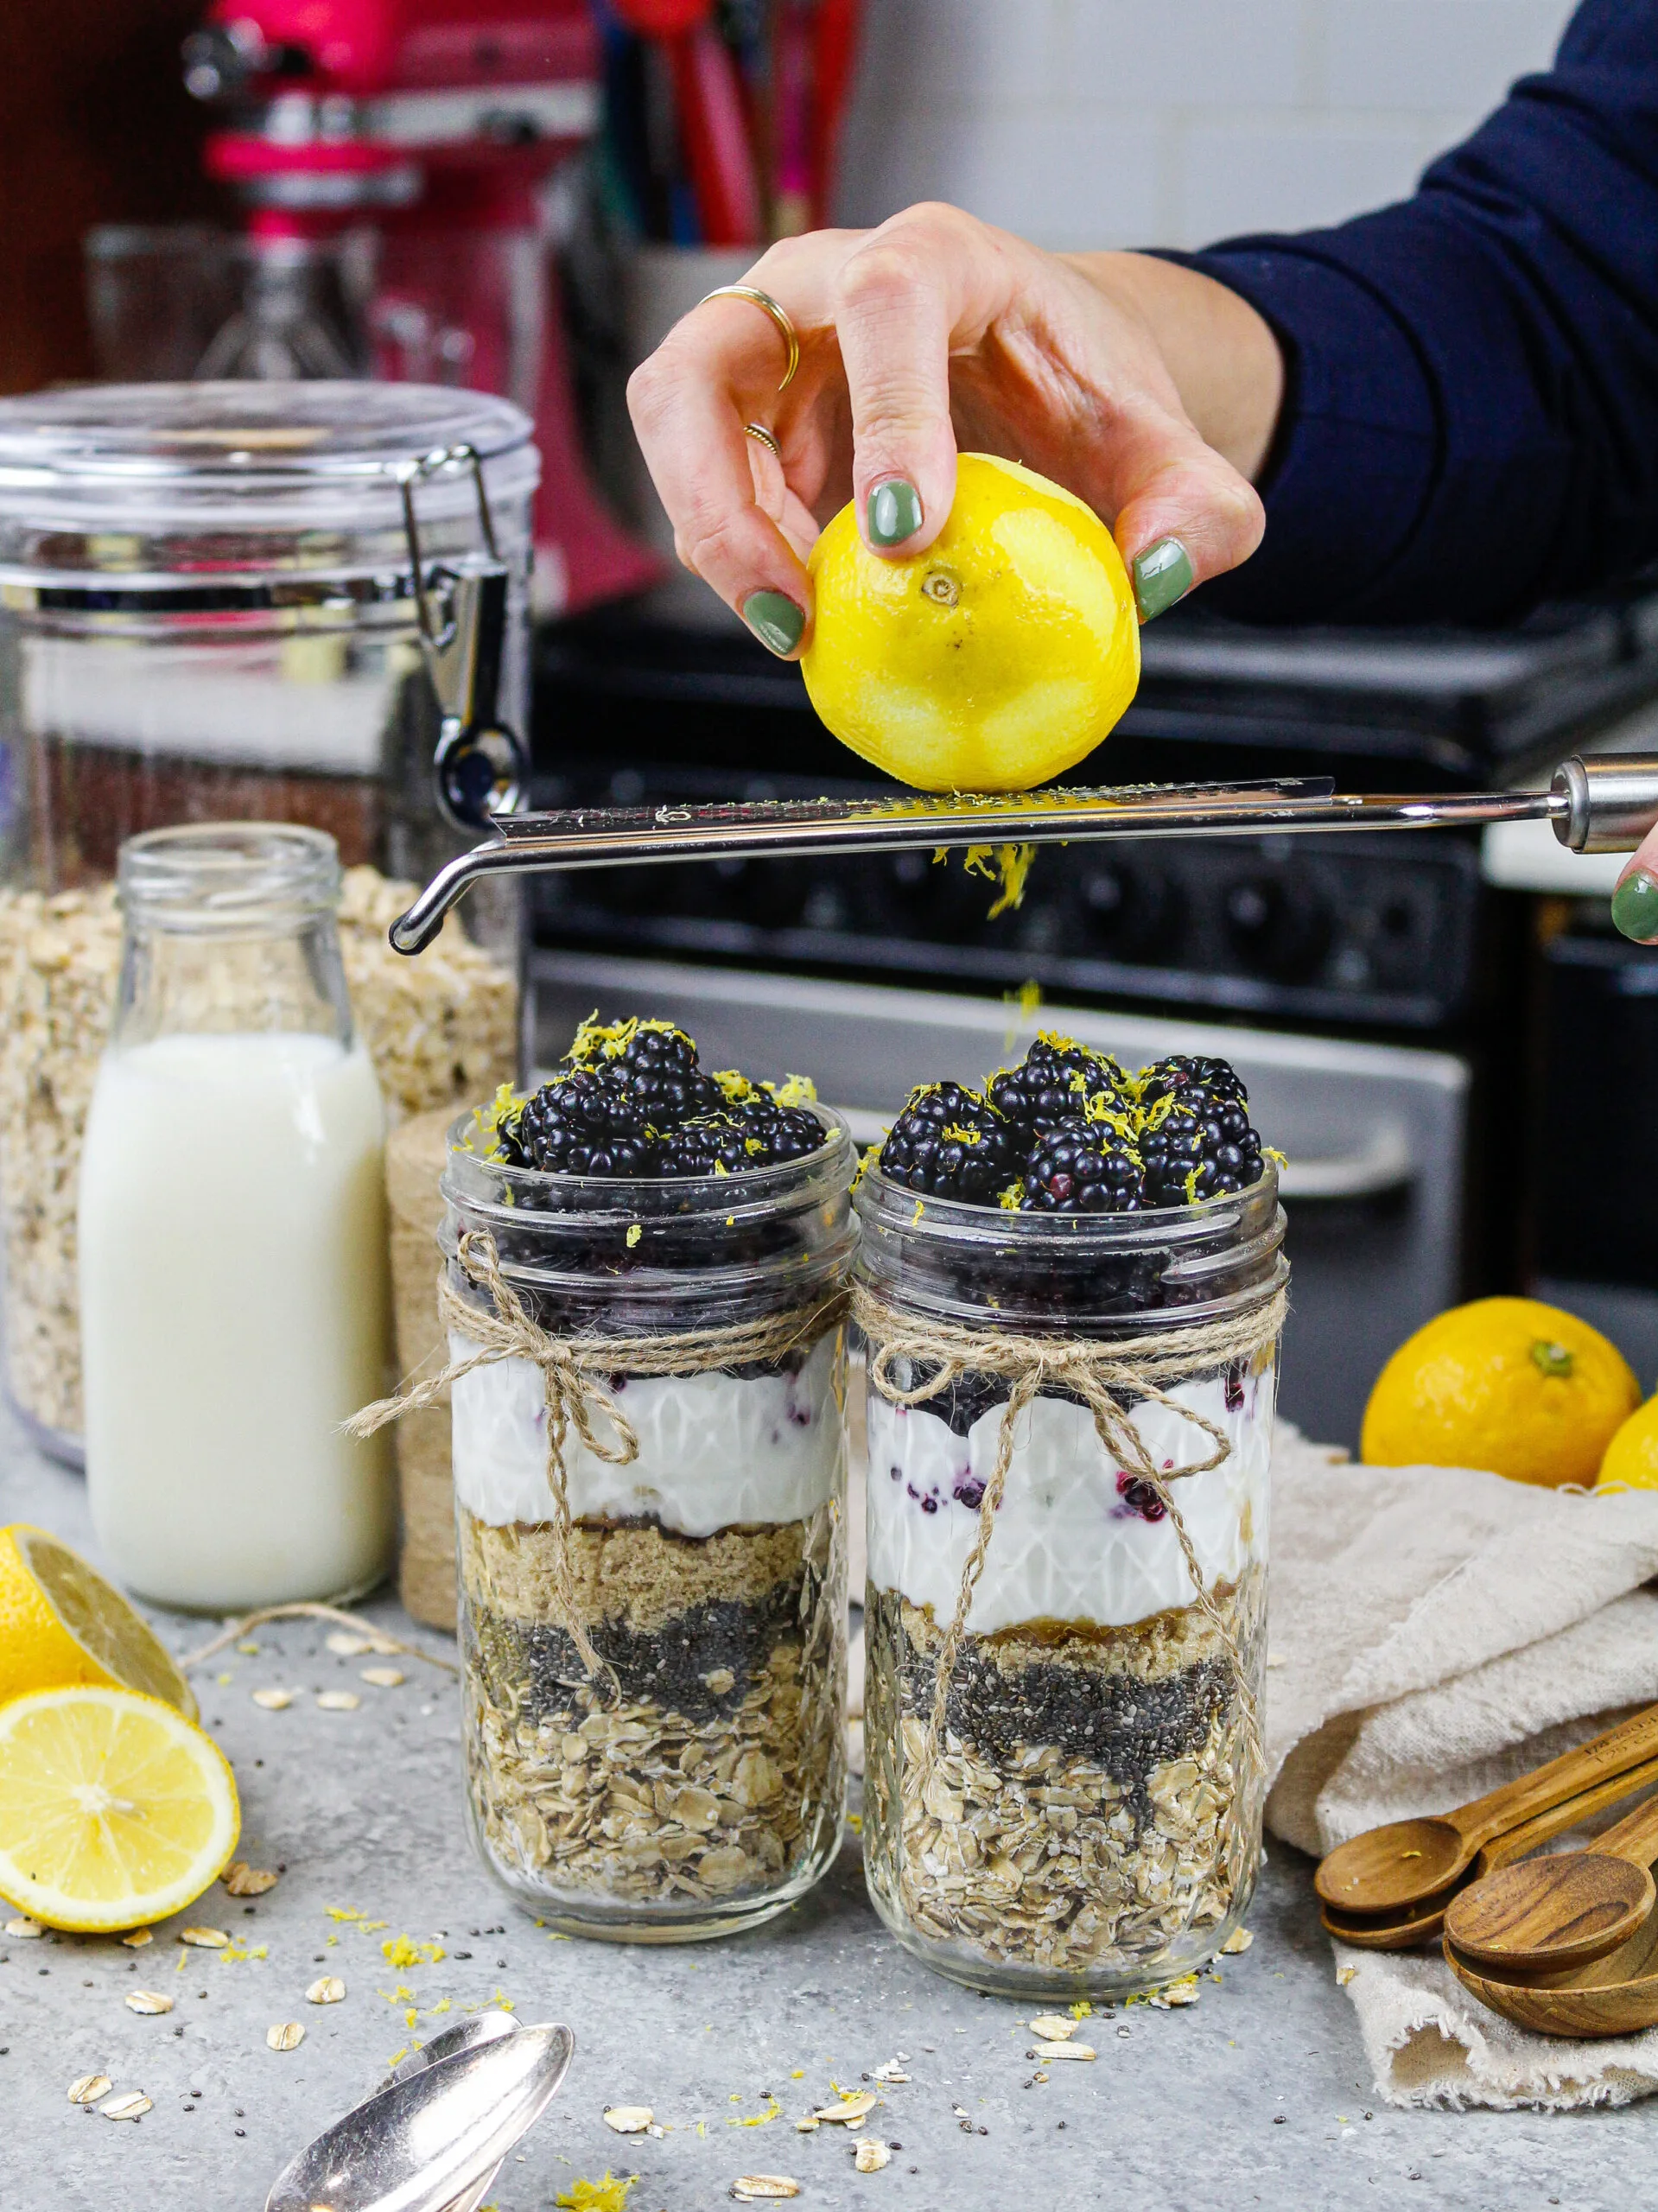 image of a lemon being zested into blackberry overnight oats